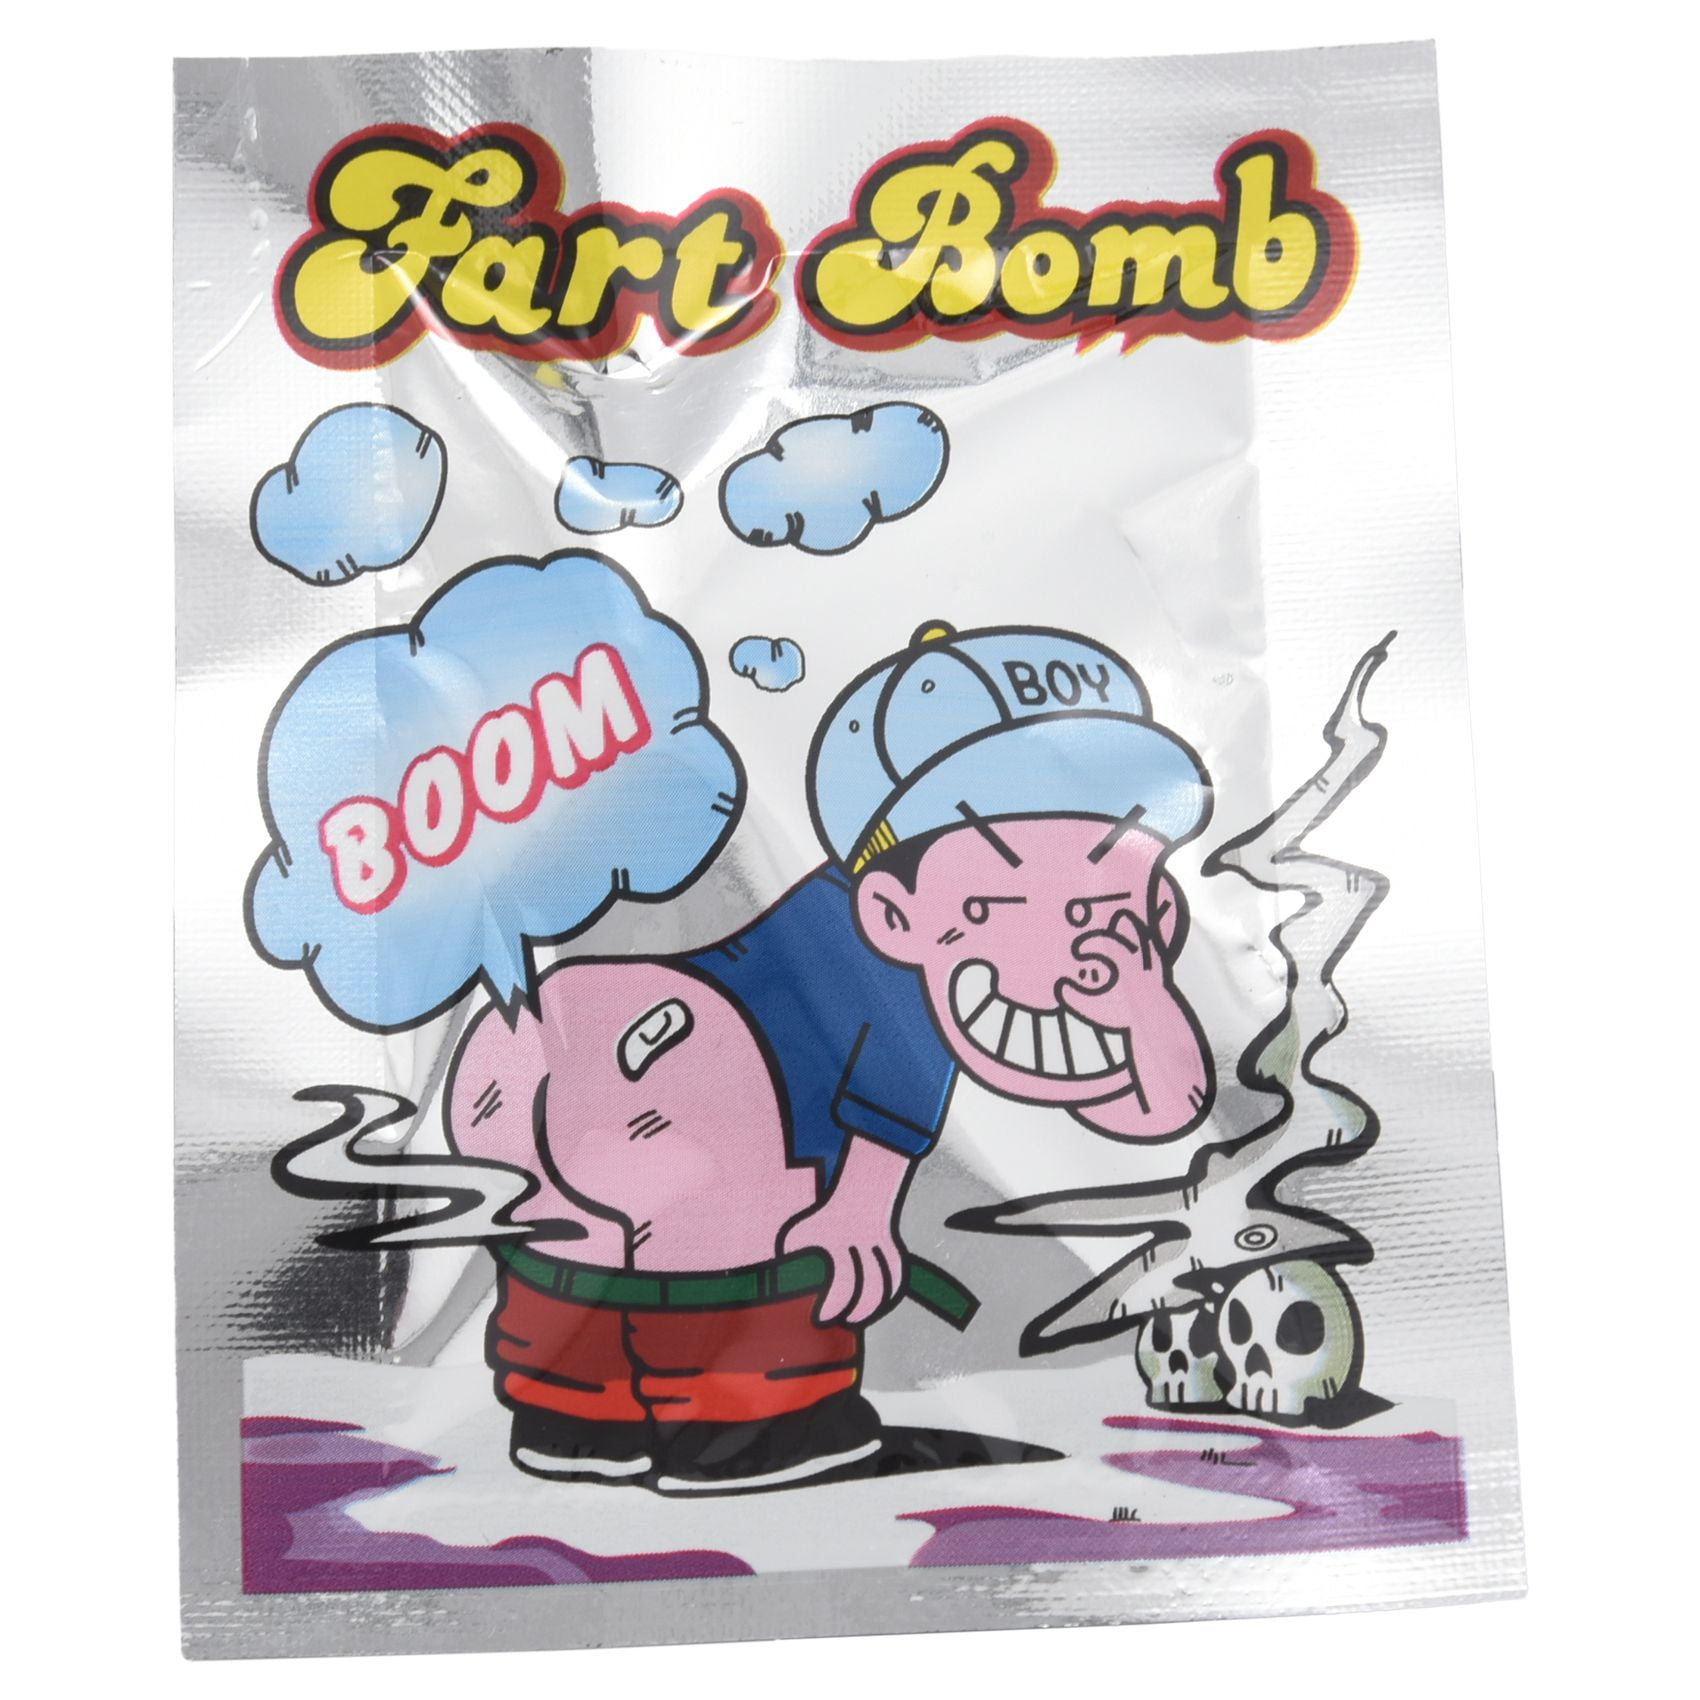 Box of 100 Fart Bombs Nasty Smelly Stink Bags